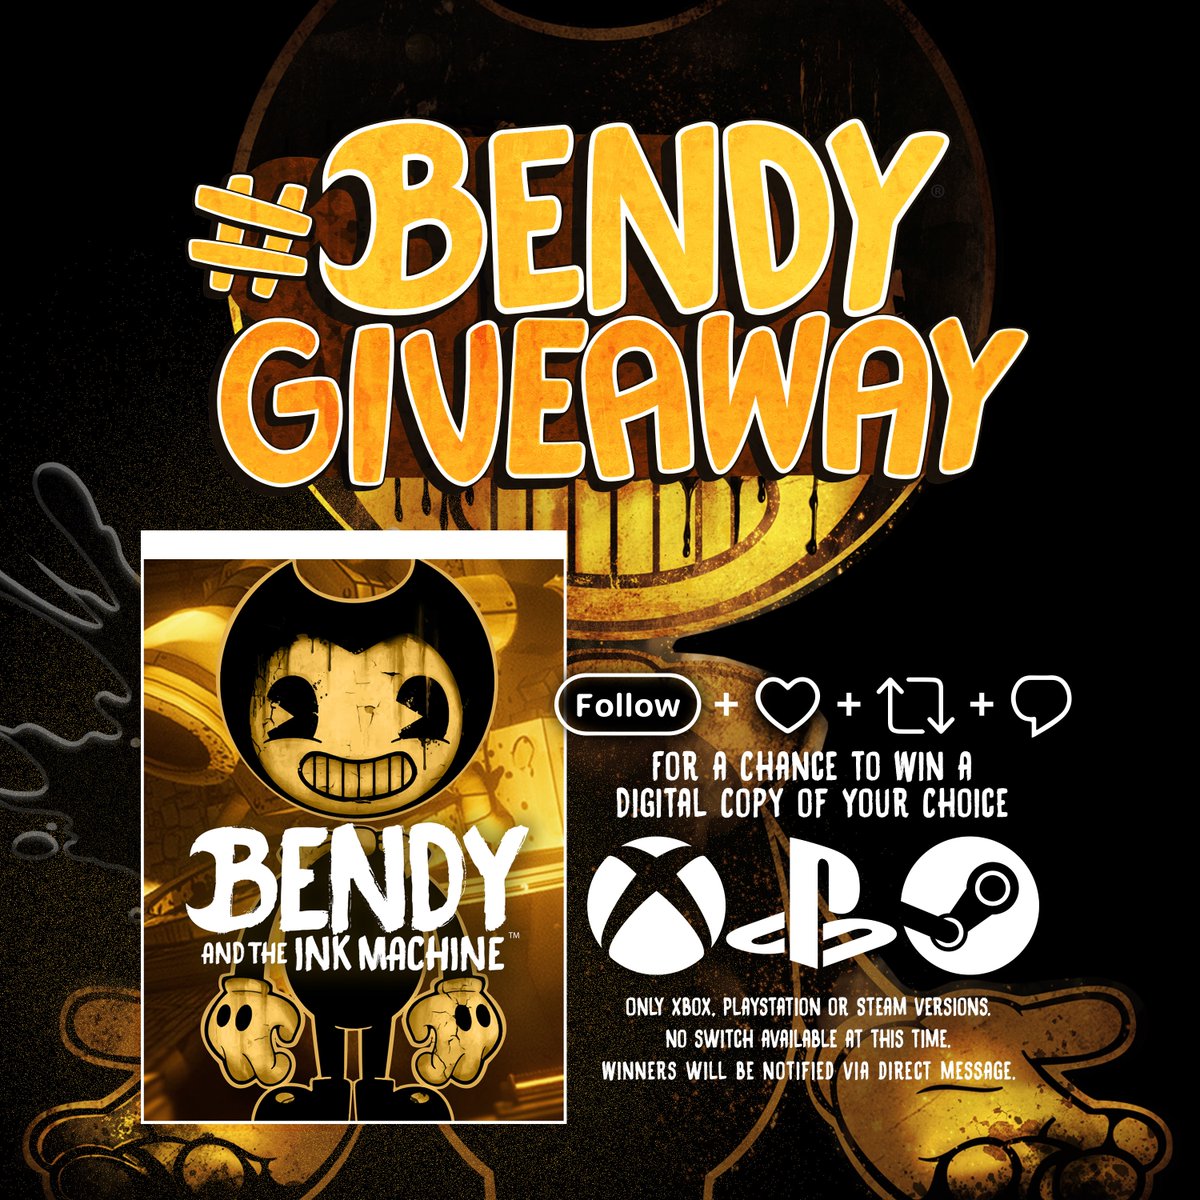 🟡 It’s time for the #BENDYGIVEAWAY ! 🟡 You could win the original #BATIM on the platform of your choice! 3 Winners will be chosen tomorrow at random. To enter do all 4 of the following on this post: 🚶🏻‍♂️ Follow ♥️ Like 🔁 Retweet ✍️ Comment Good luck! #BENDY